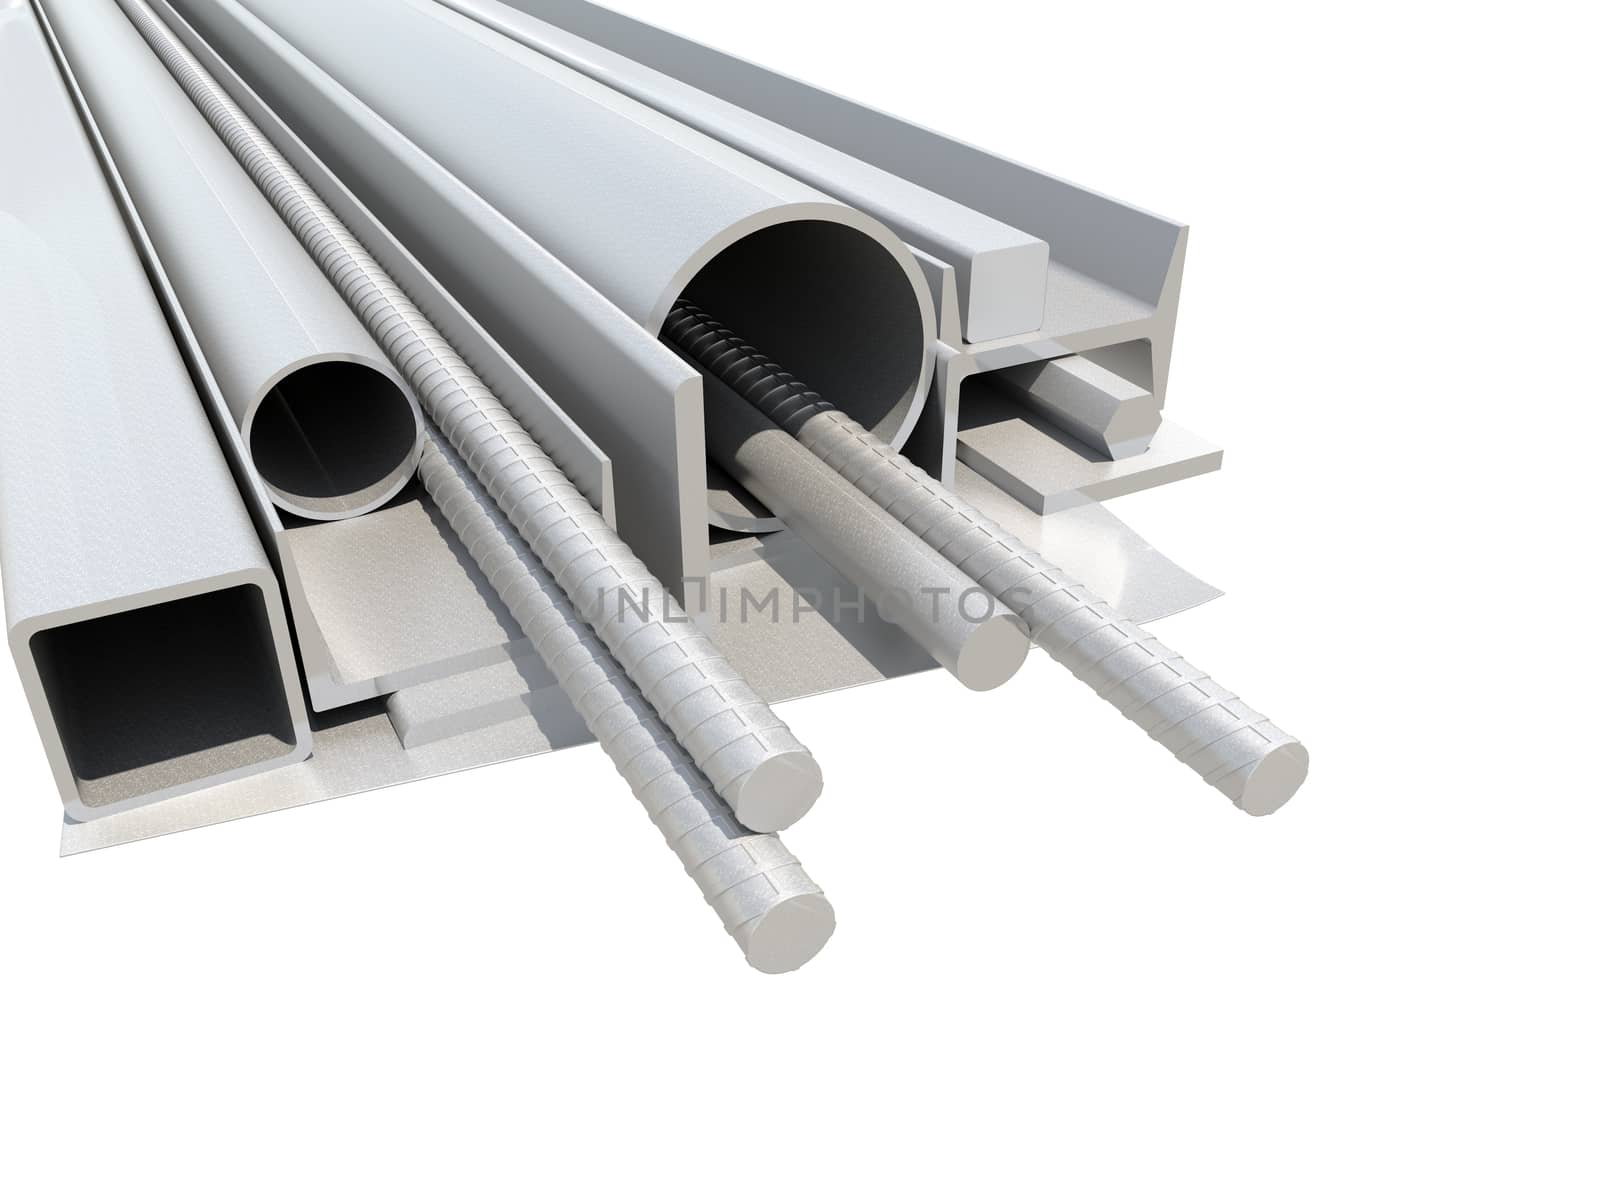 Rolled metal products. White background. 3D illustration